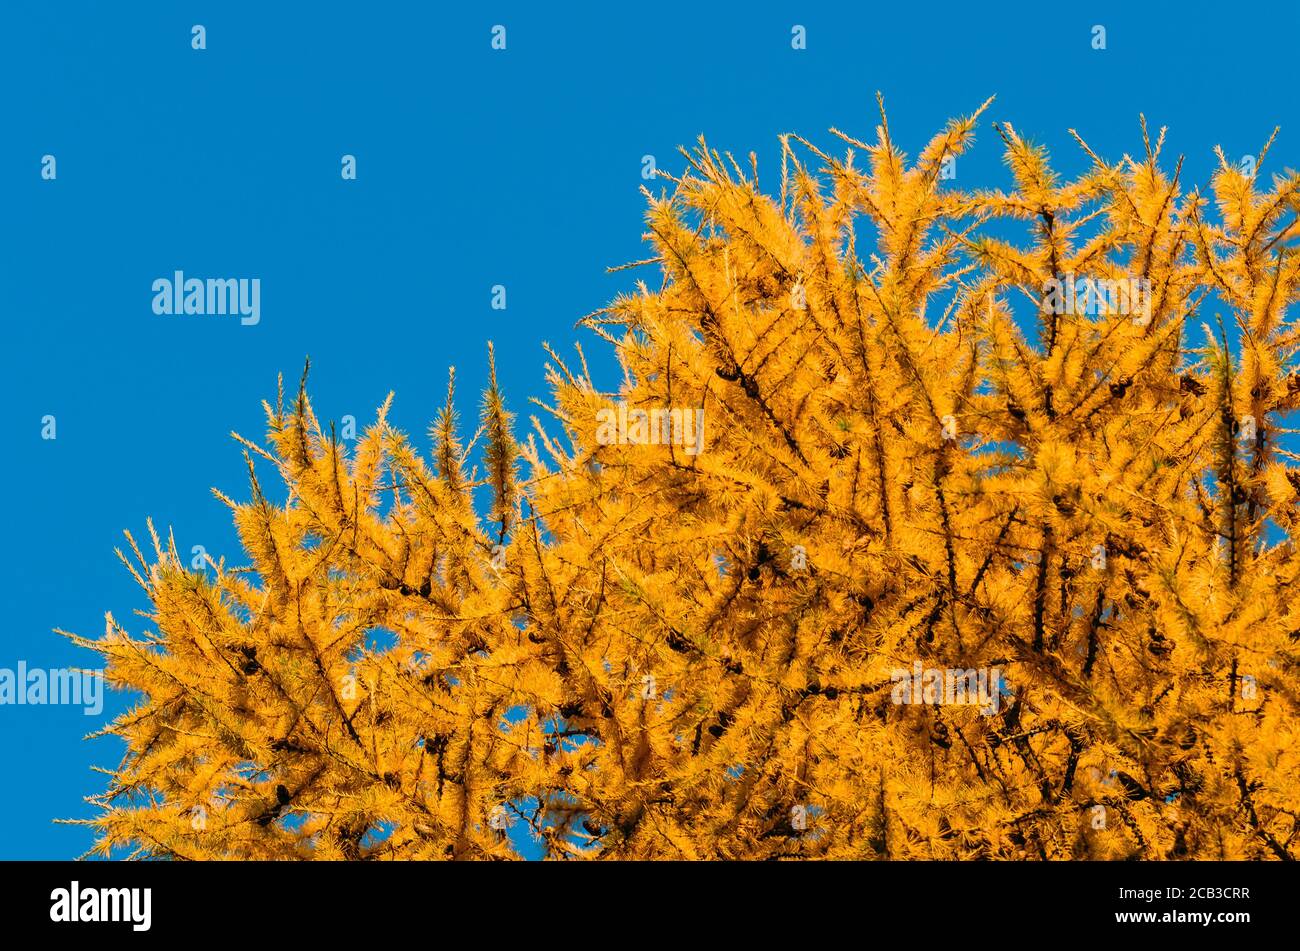 Brightly yellow needles of a larch tree against a blue sky background Stock Photo